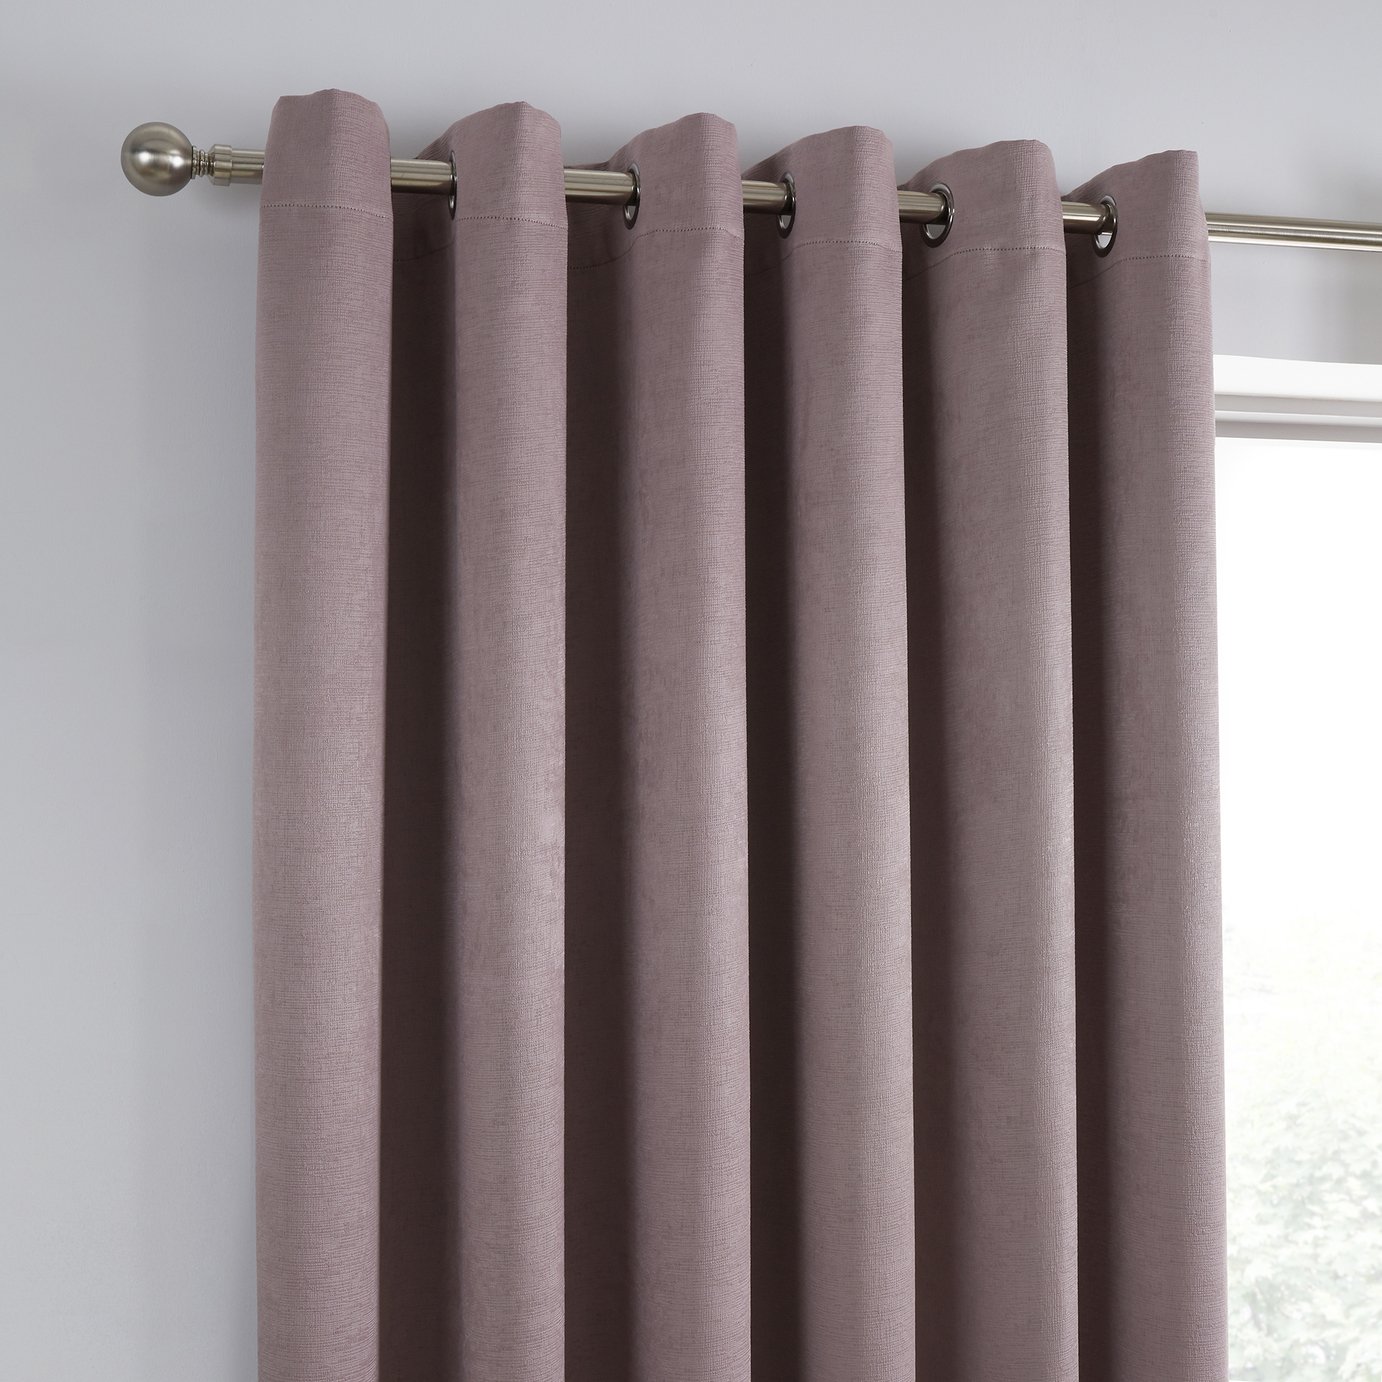 Fusion Strata Dim Out Woven Eyelet Curtains - Blush Pink